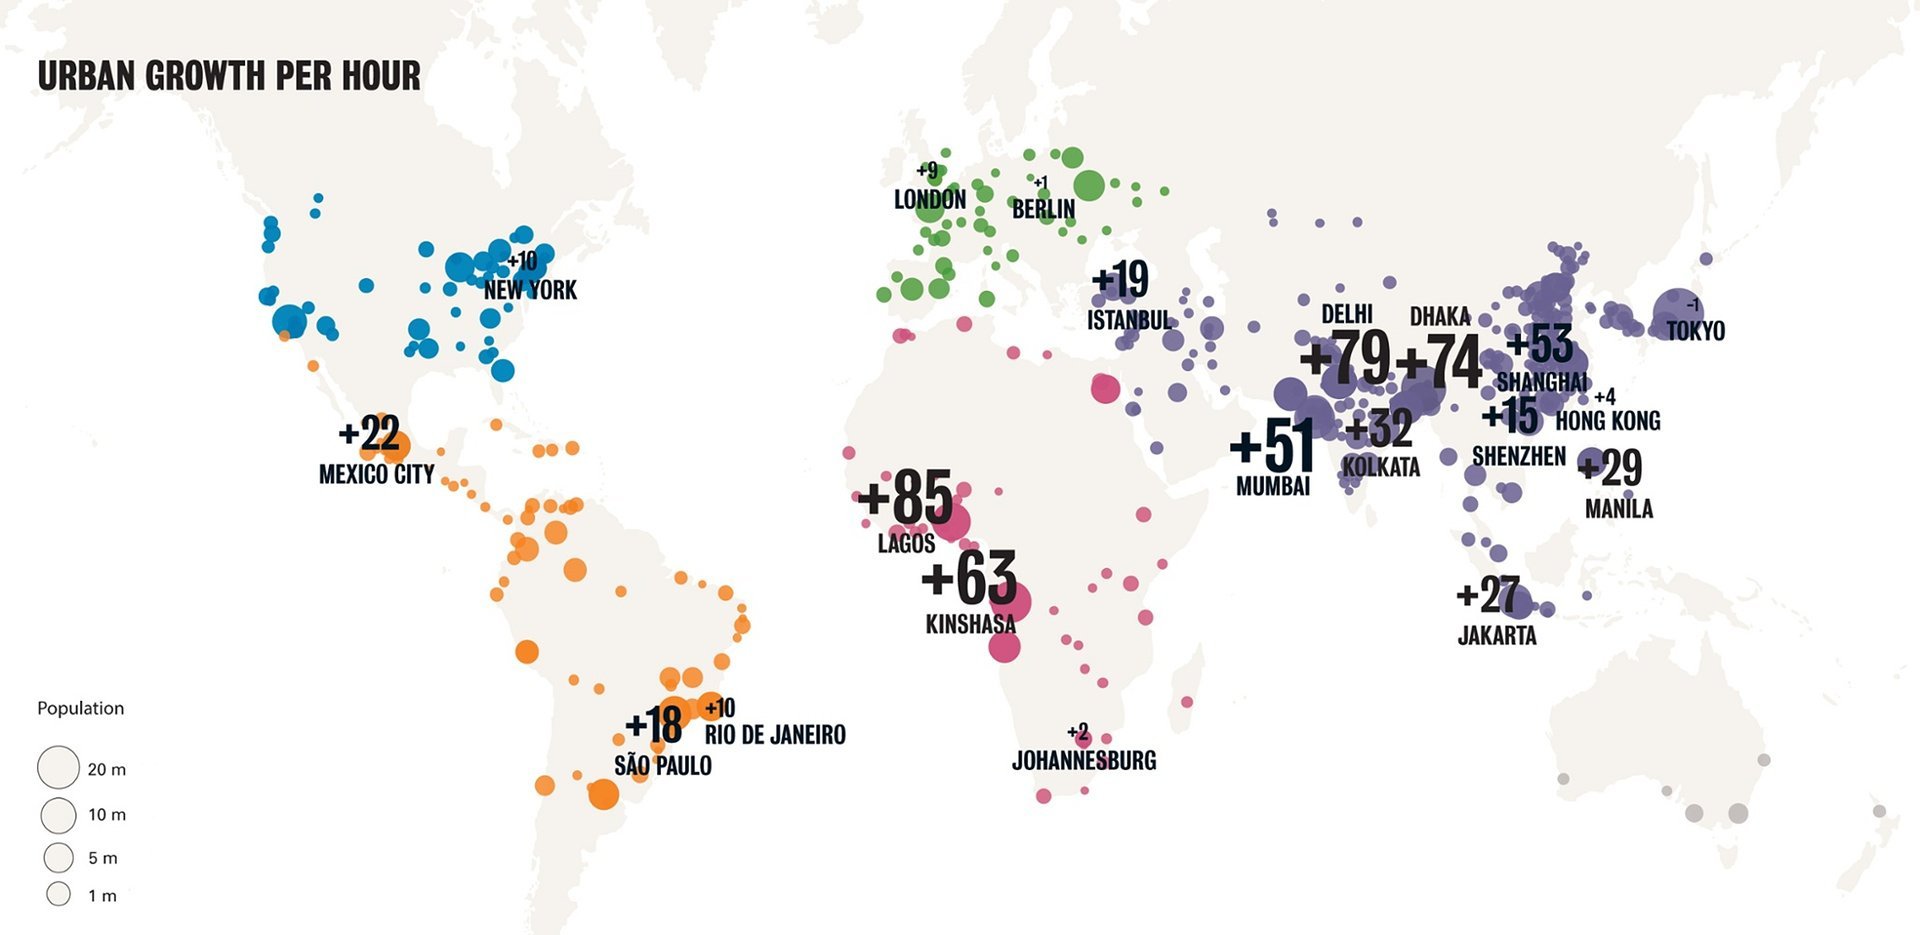 Mapped: The World's Fastest Growing Cities